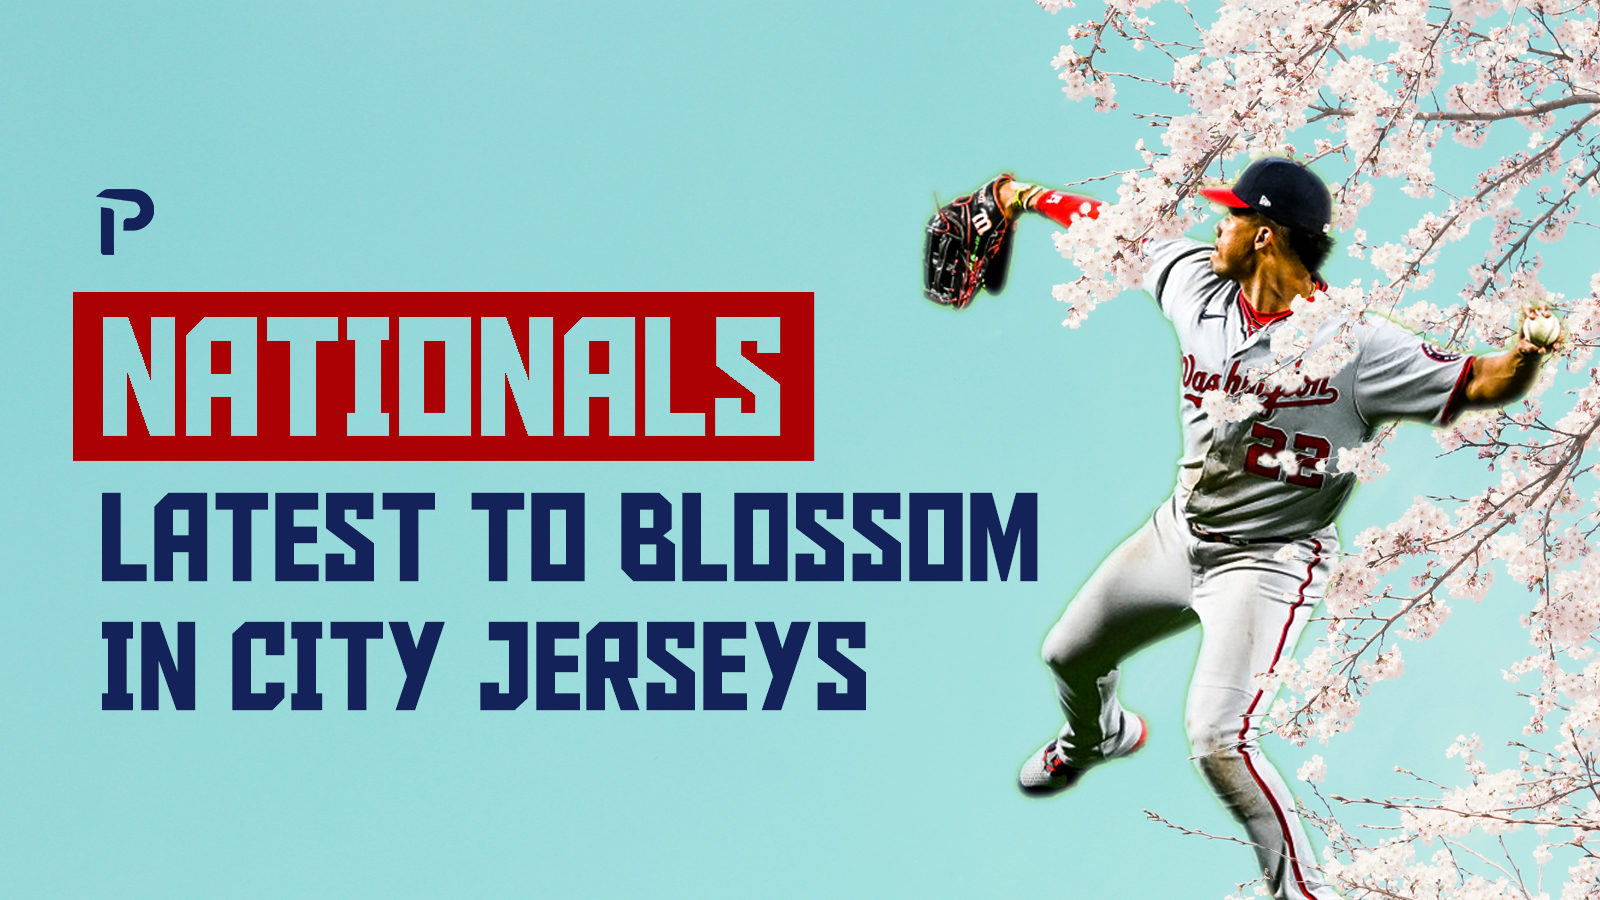 Fans line up at Nats Park for cherry blossom jerseys - WTOP News